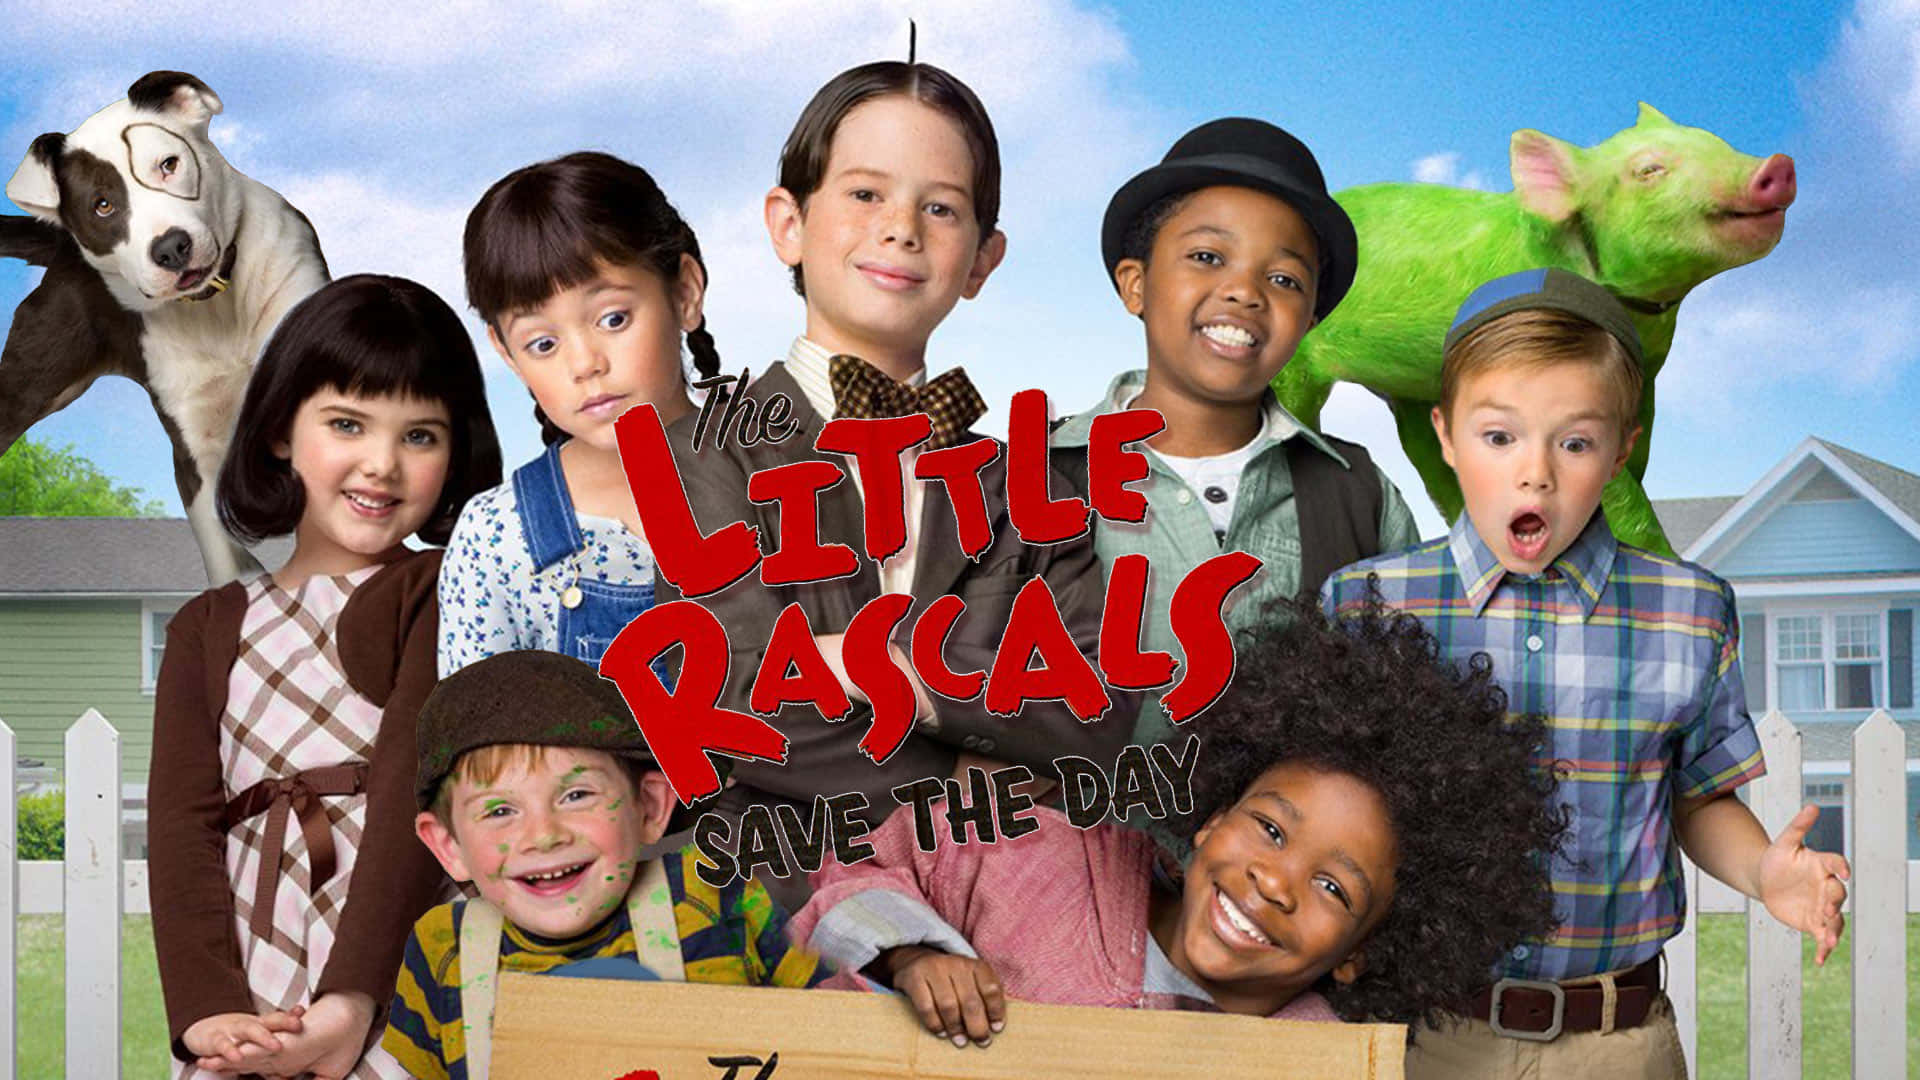 322 The Little Rascals Photos & High Res Pictures - Getty Images